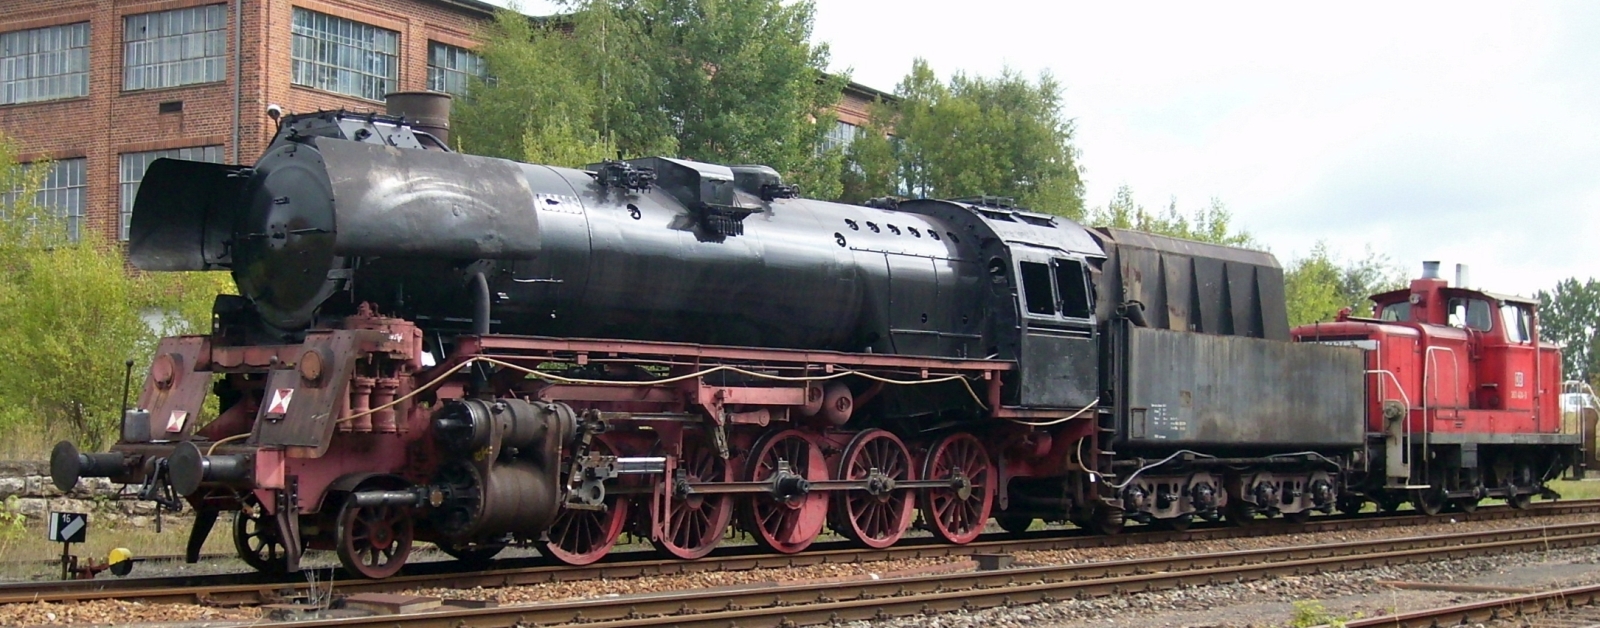 Partially disassembled 50 4073 in December 2018 in Immelborn